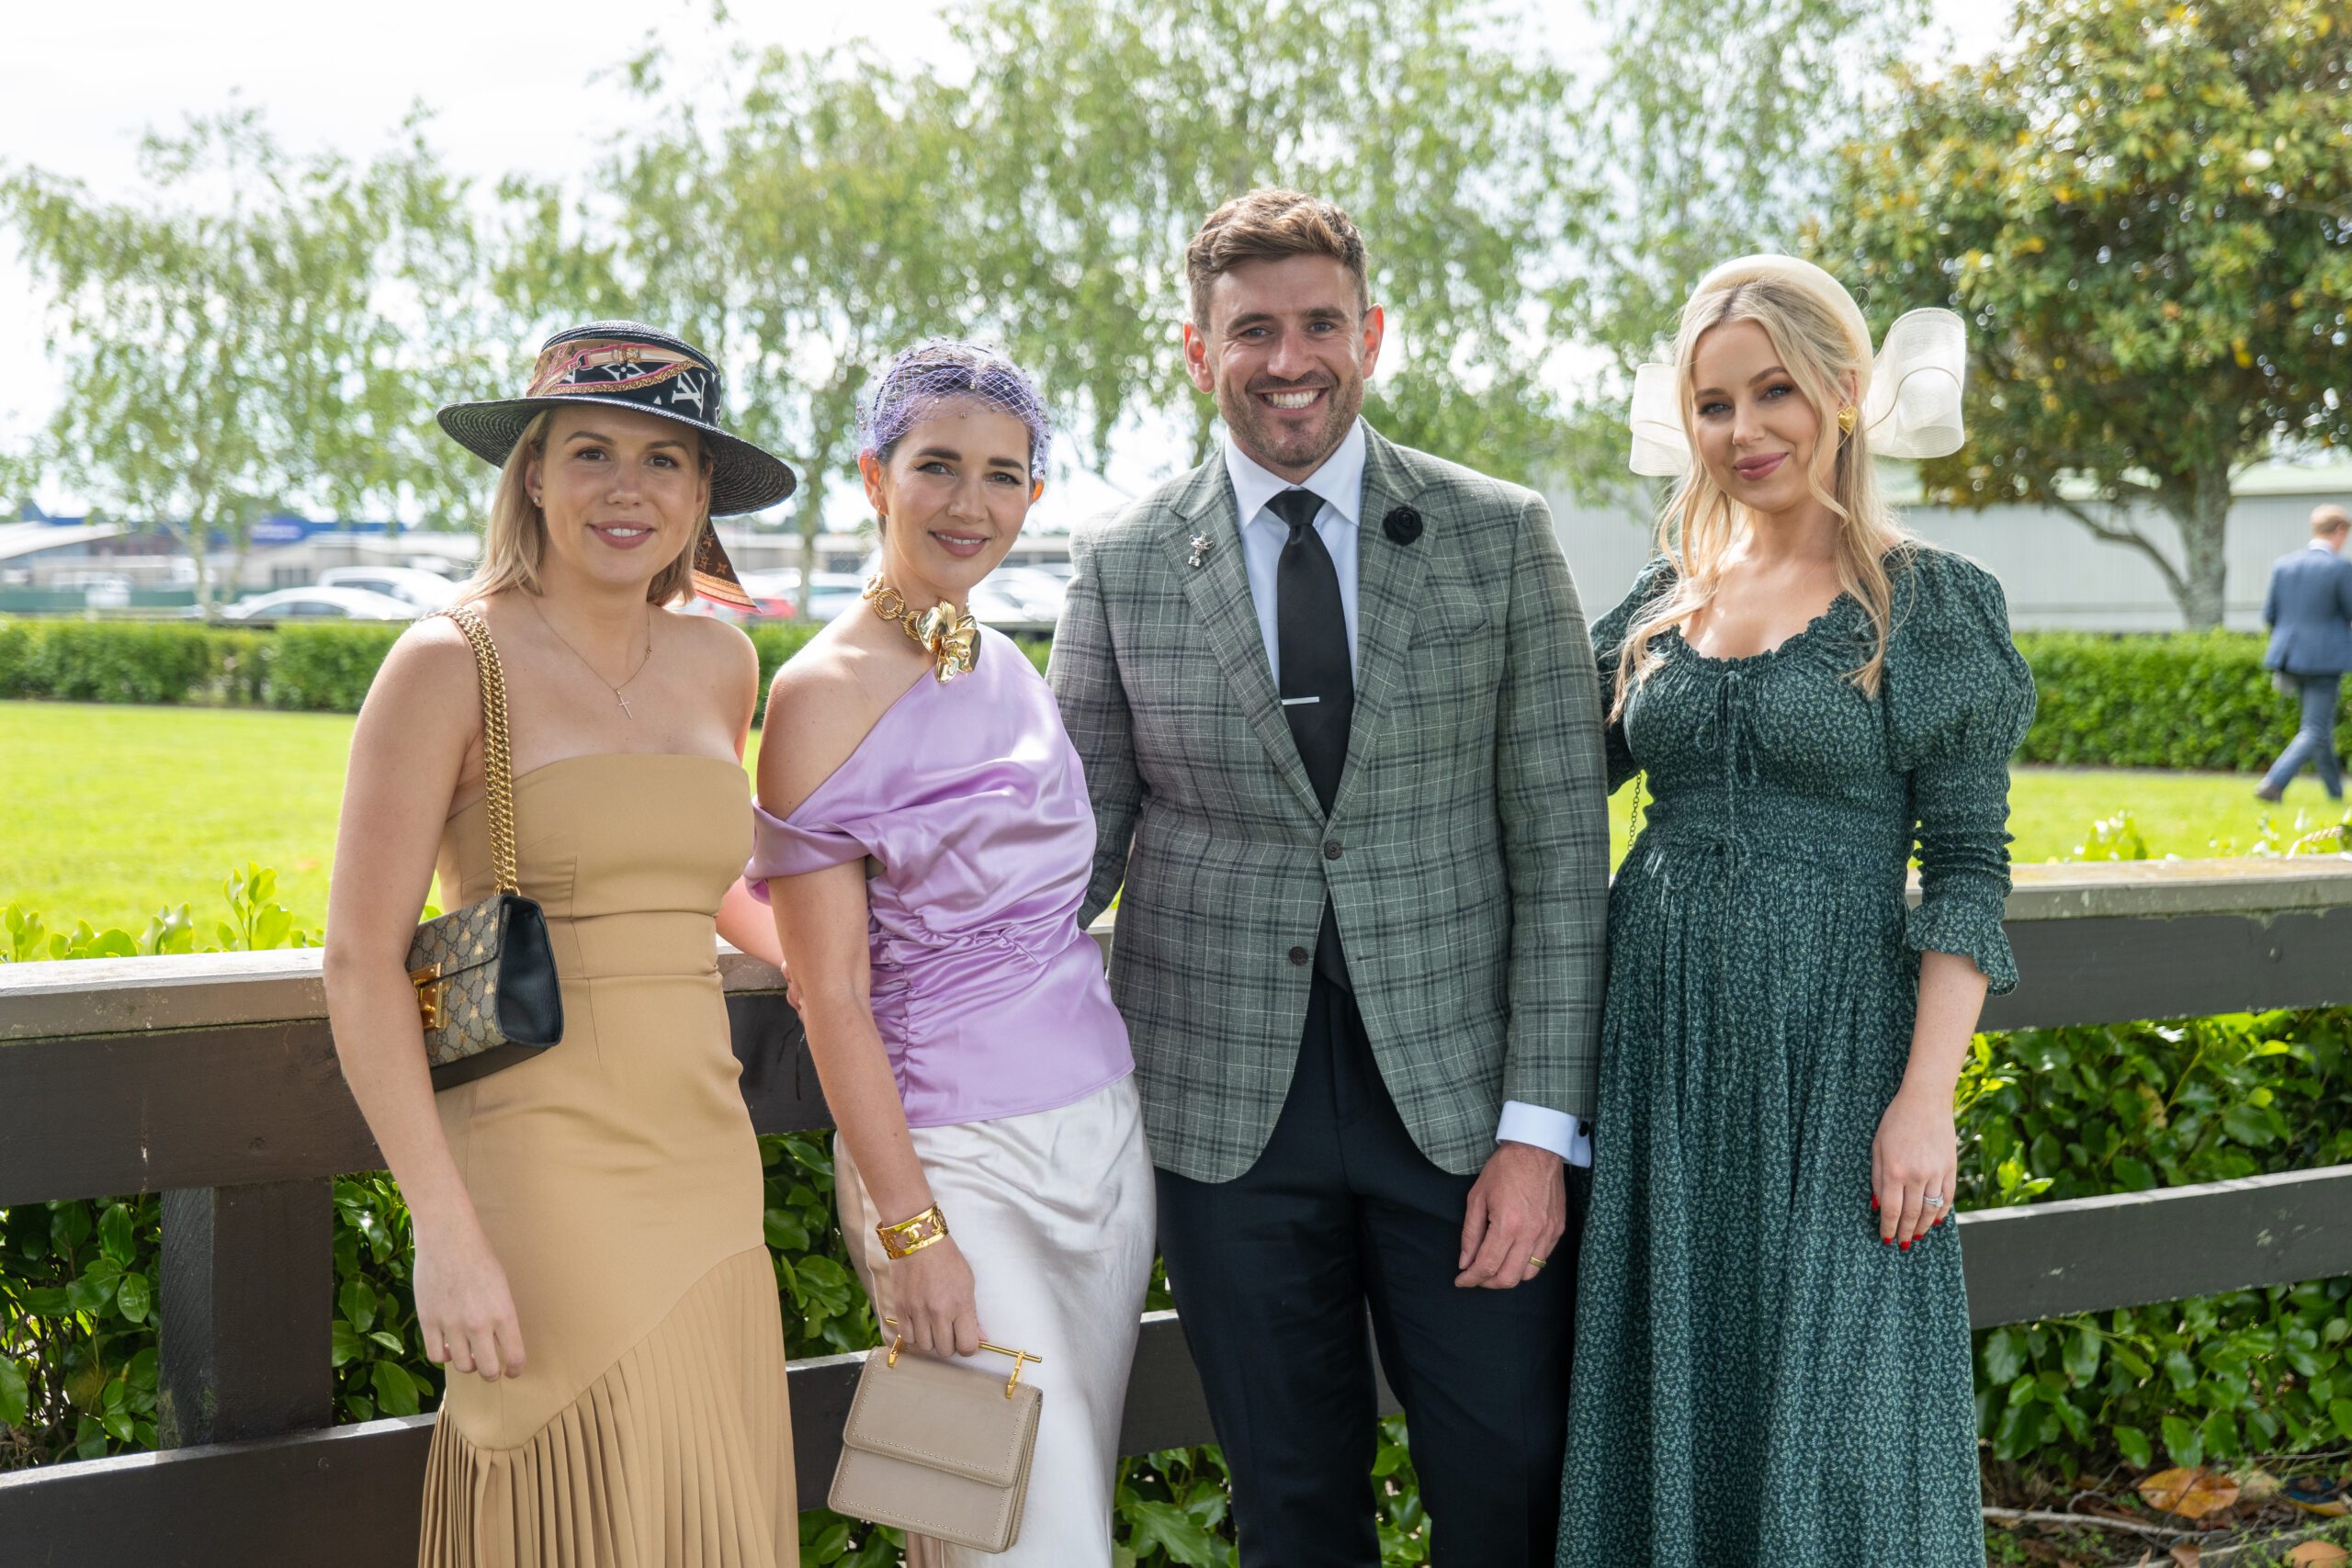 TAB Karaka Millions: What to wear to summer’s biggest event – Top tips from our ATR Ambassadors